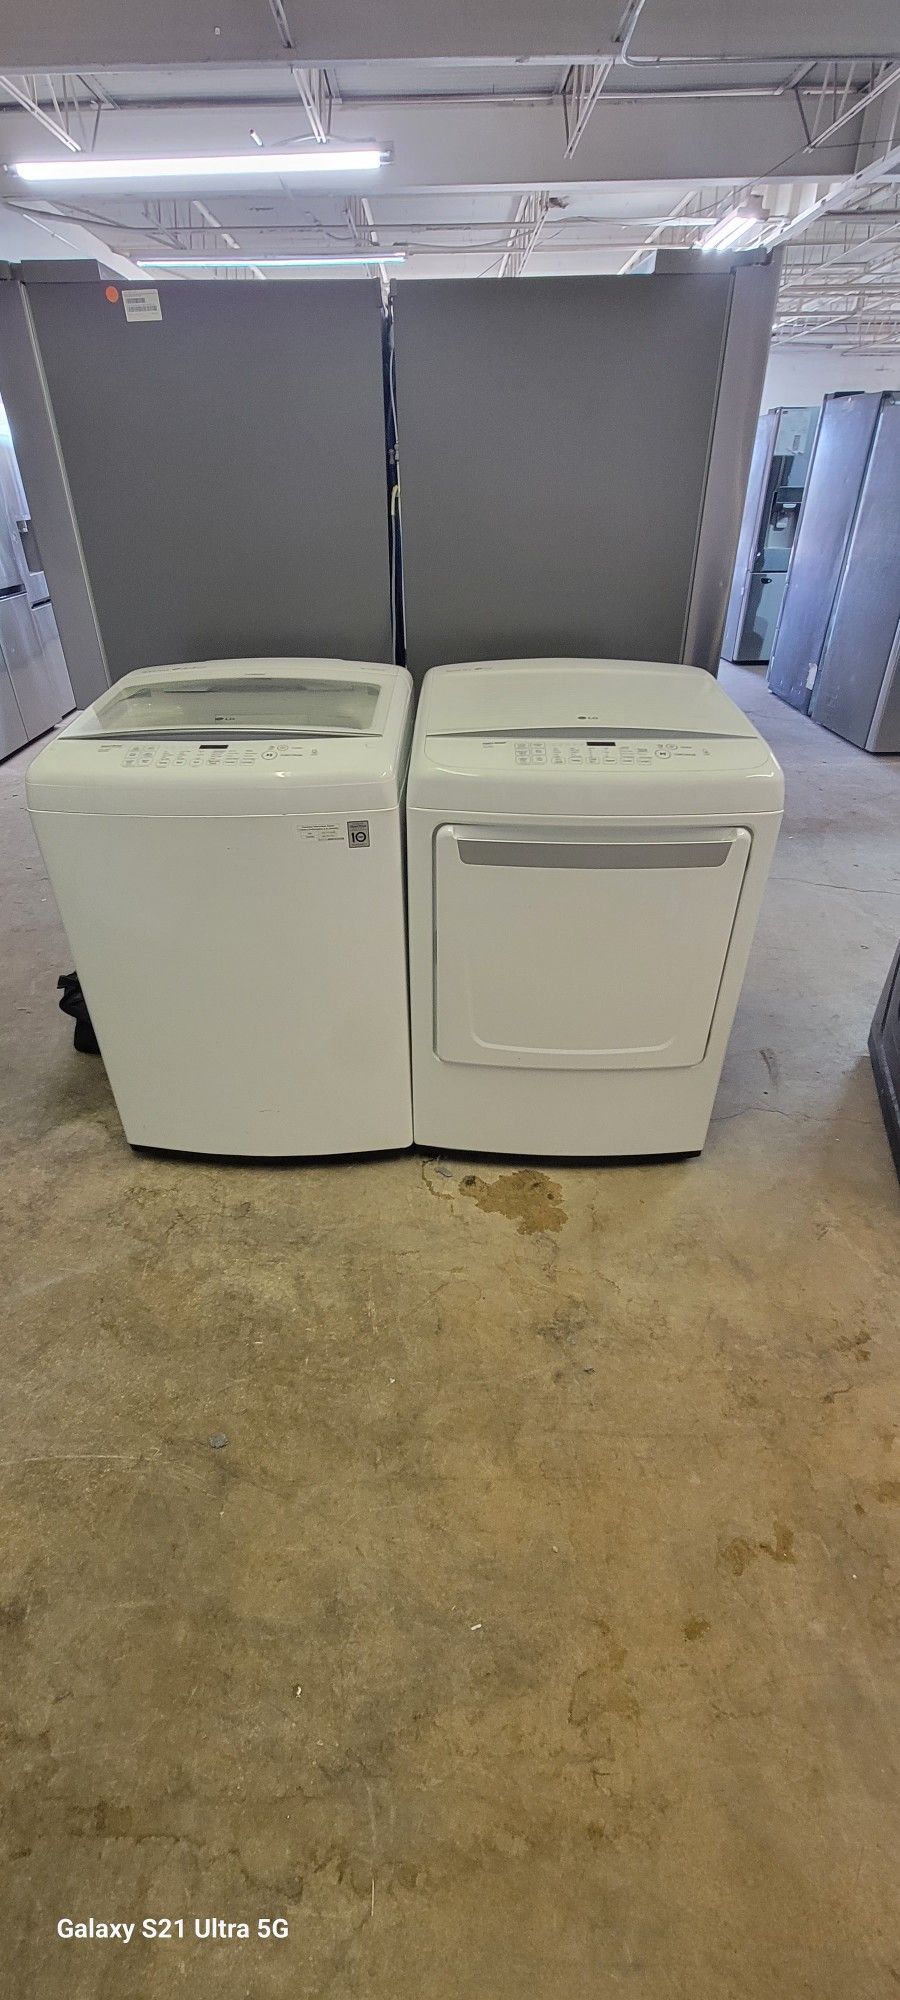 washer and dryer in good condition with delivery and installation included different payment methods cash,cash app and financing